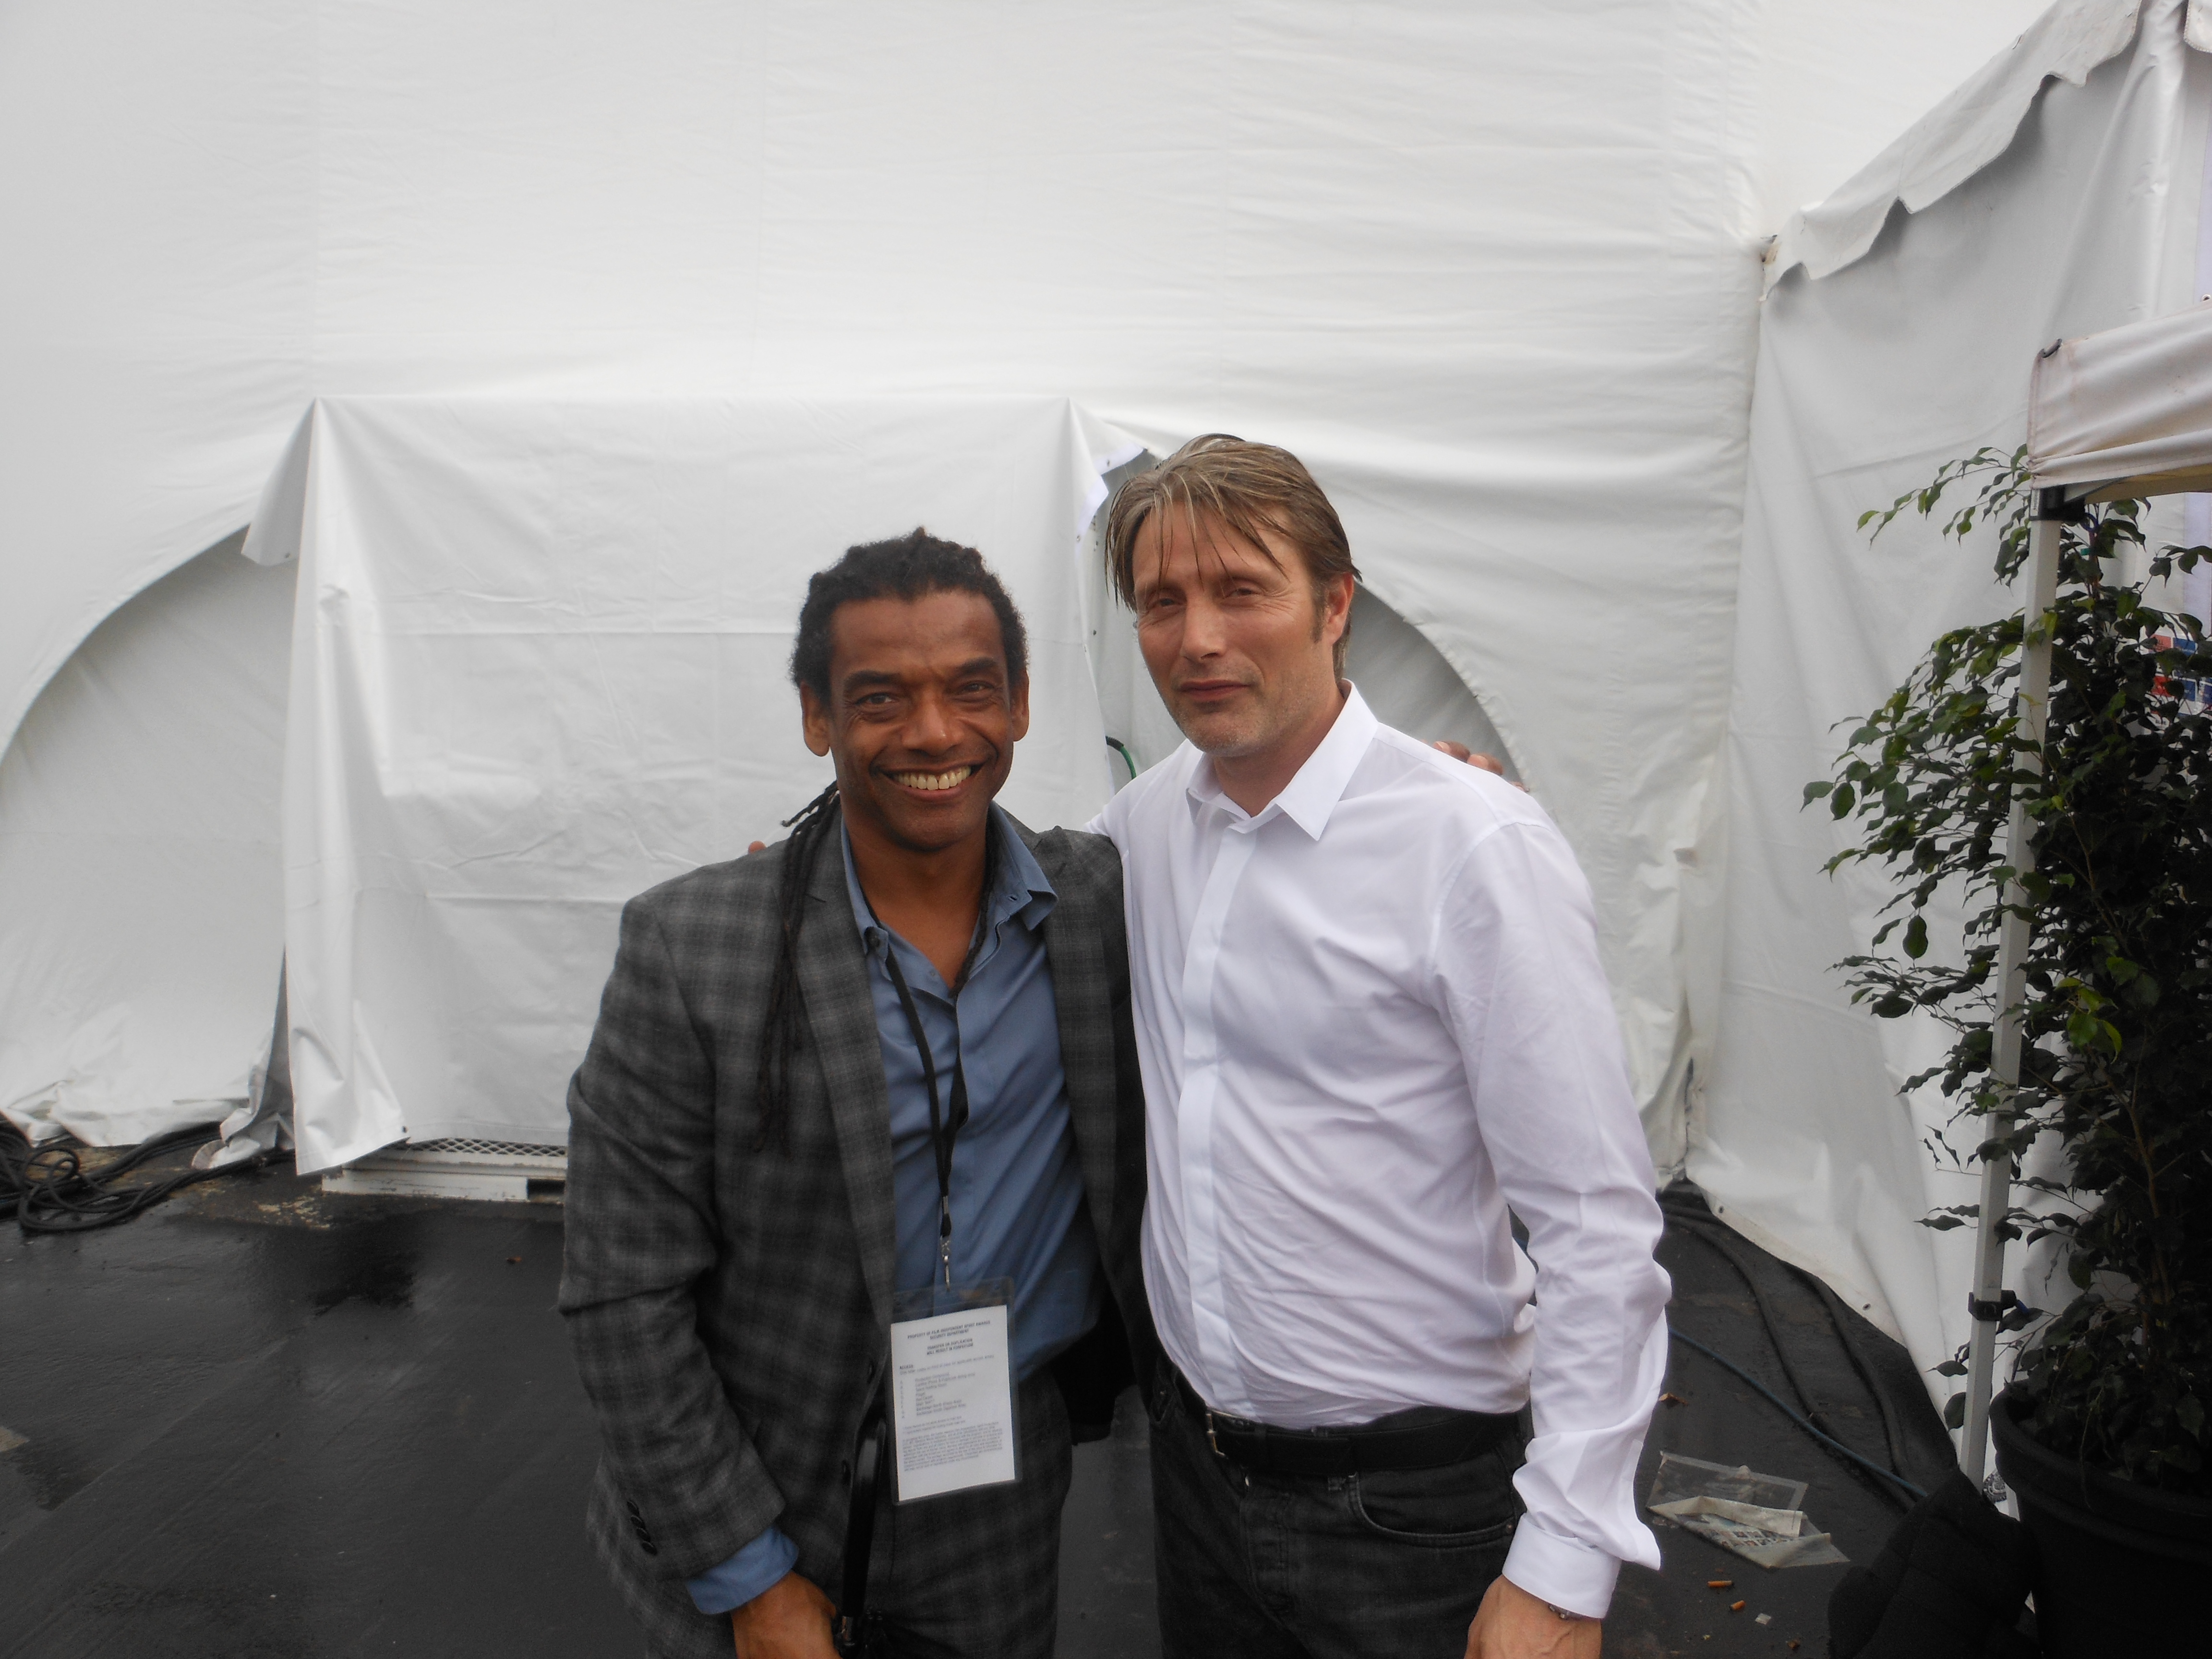 With Mads Mikkelsen (Hannibal, Casino Royale) at the 2014 Independent Spirit Awards.